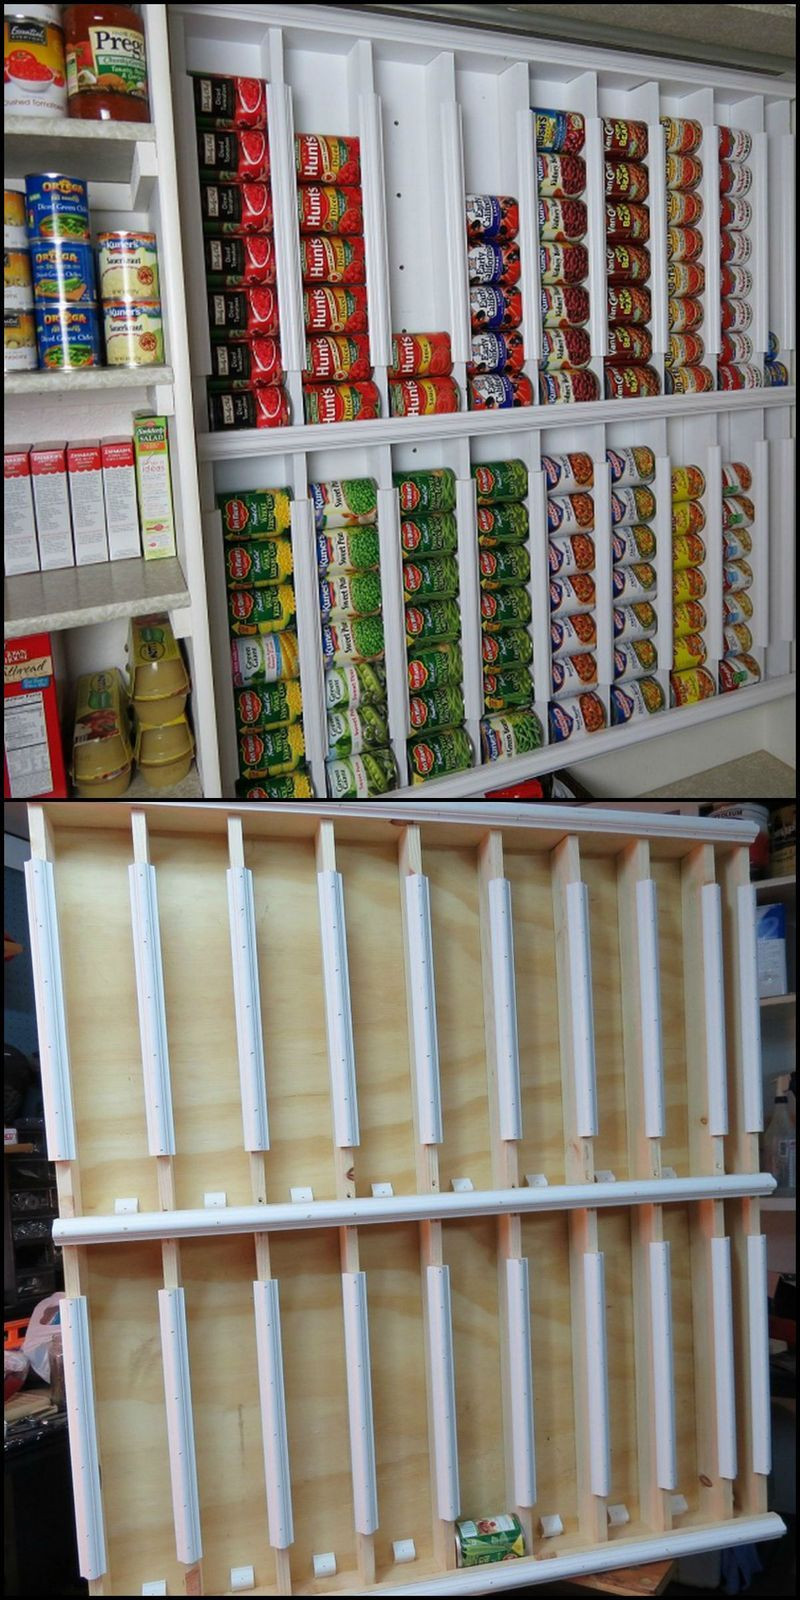 DIY Canned Food Organizer
 How To Build A Rotating Canned Food System